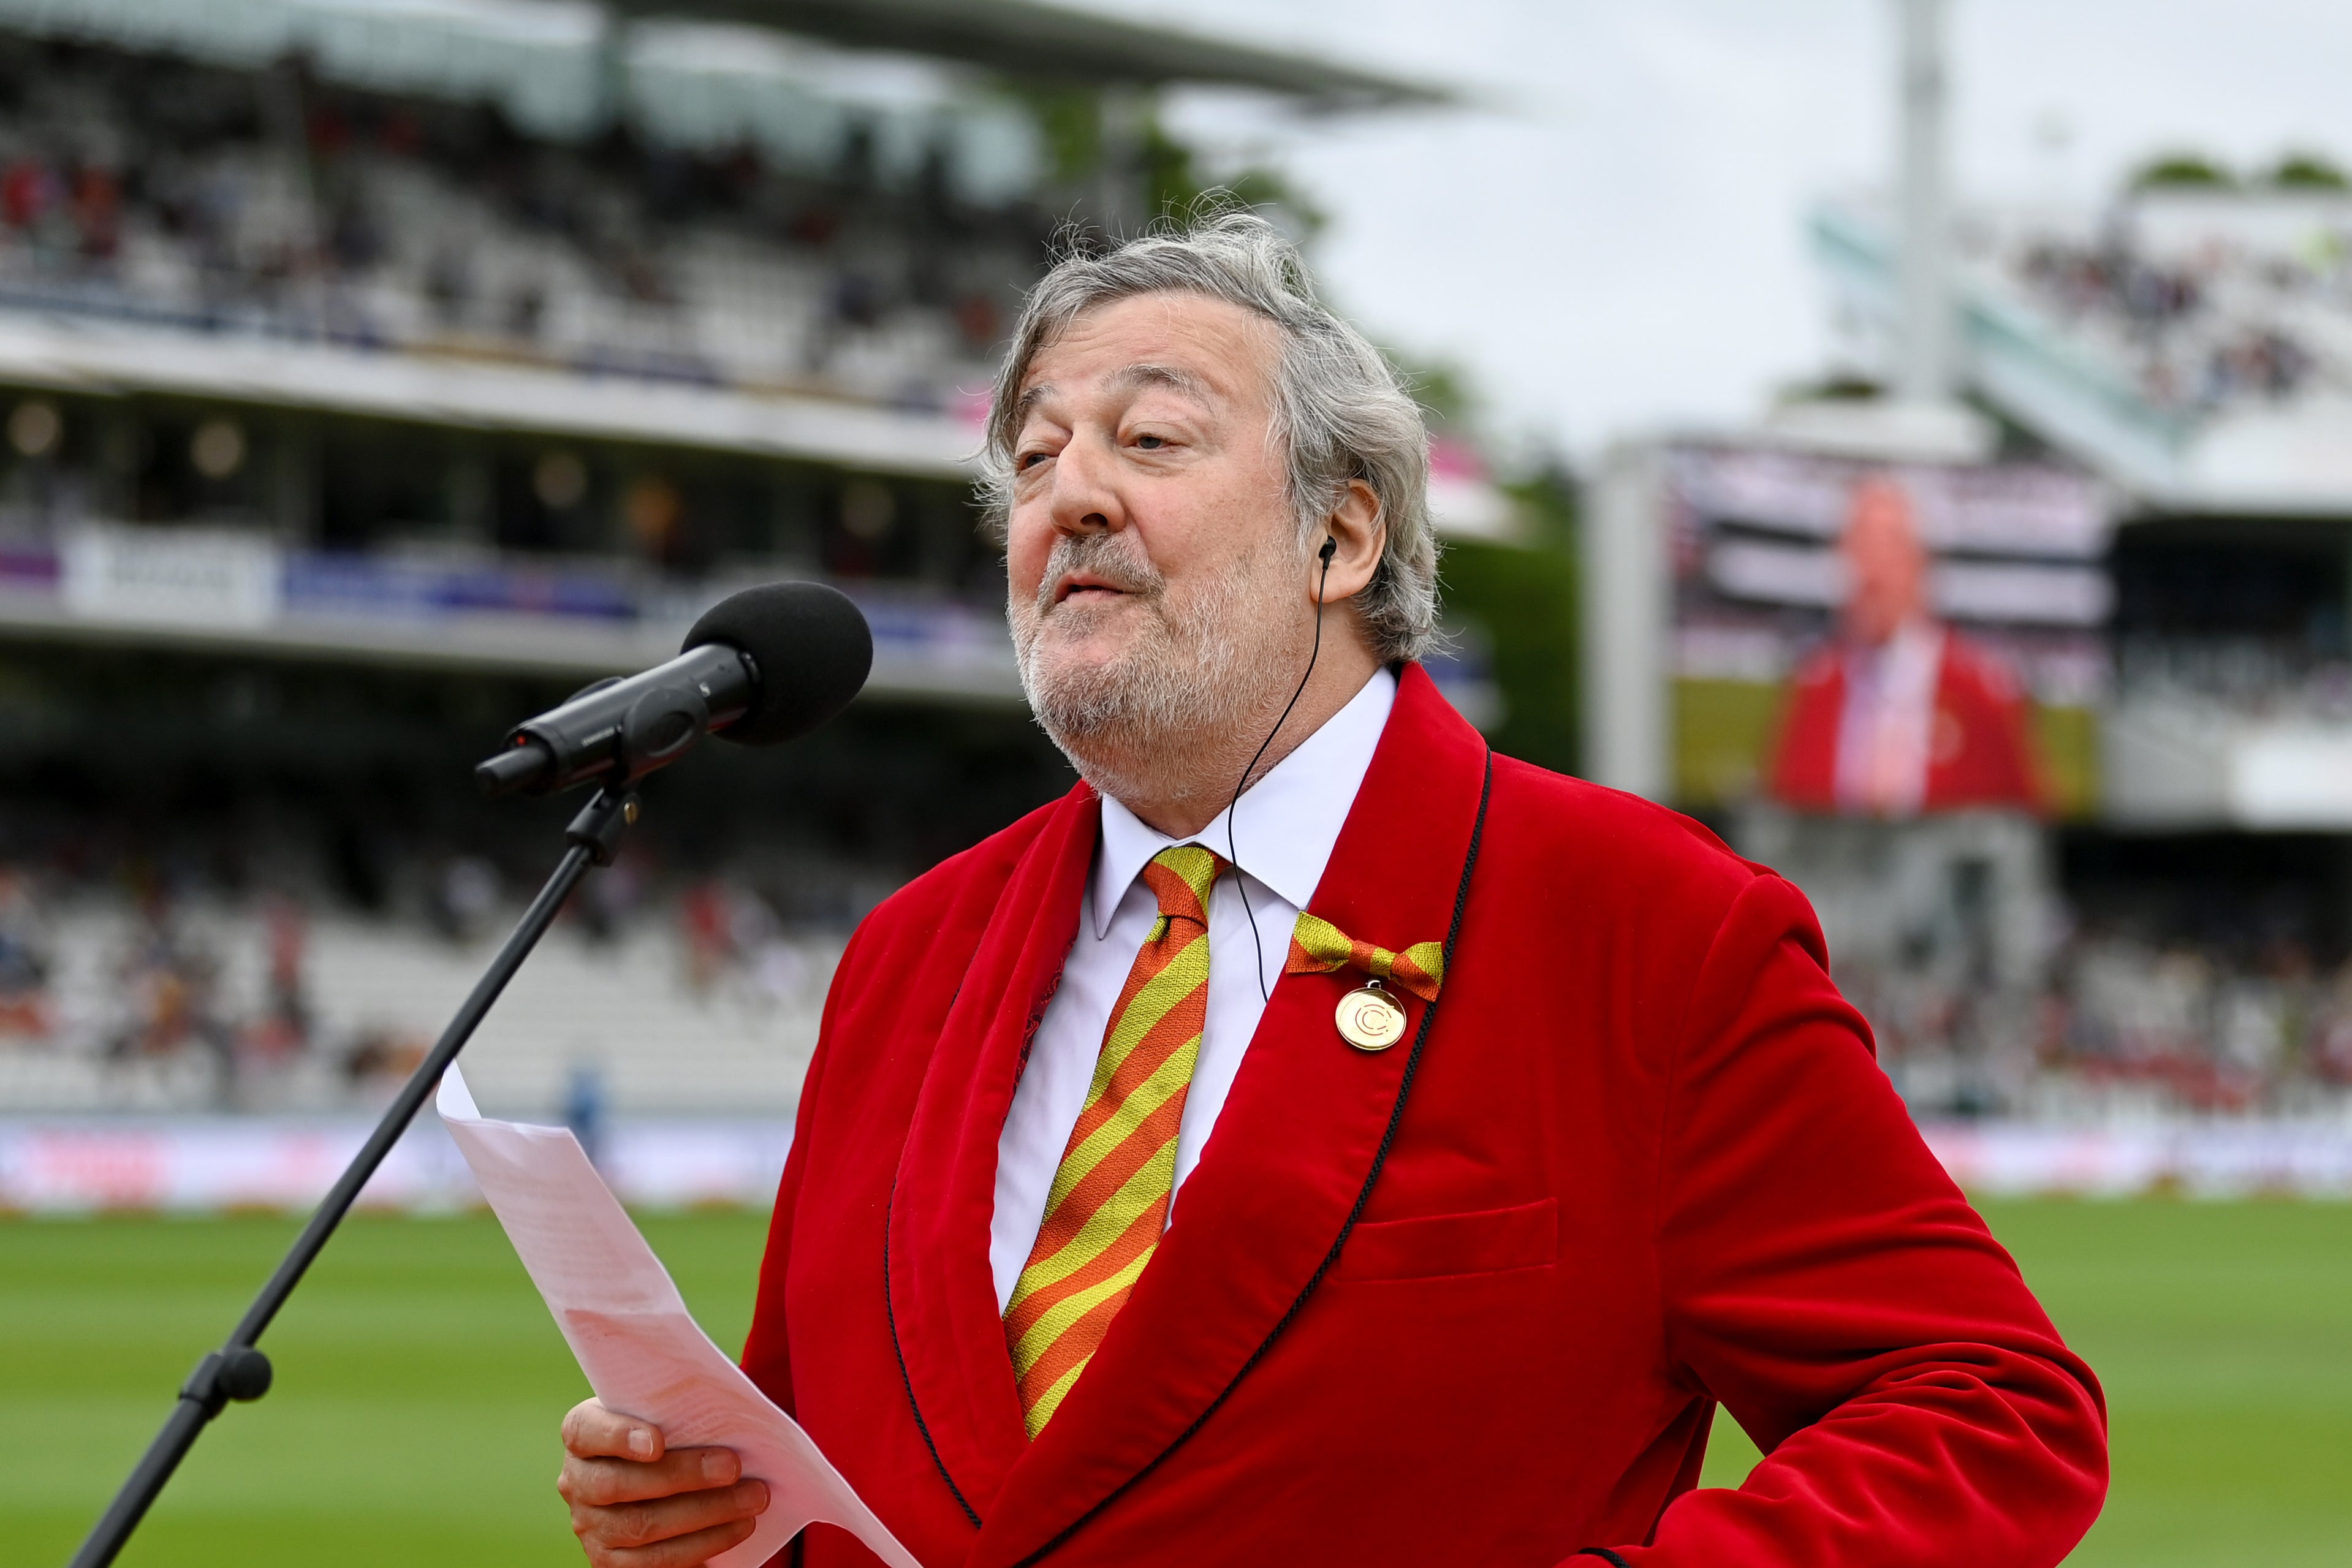 Stephen Fry will umpire the cricket match at Hay Festival’s inaugural Sports Day